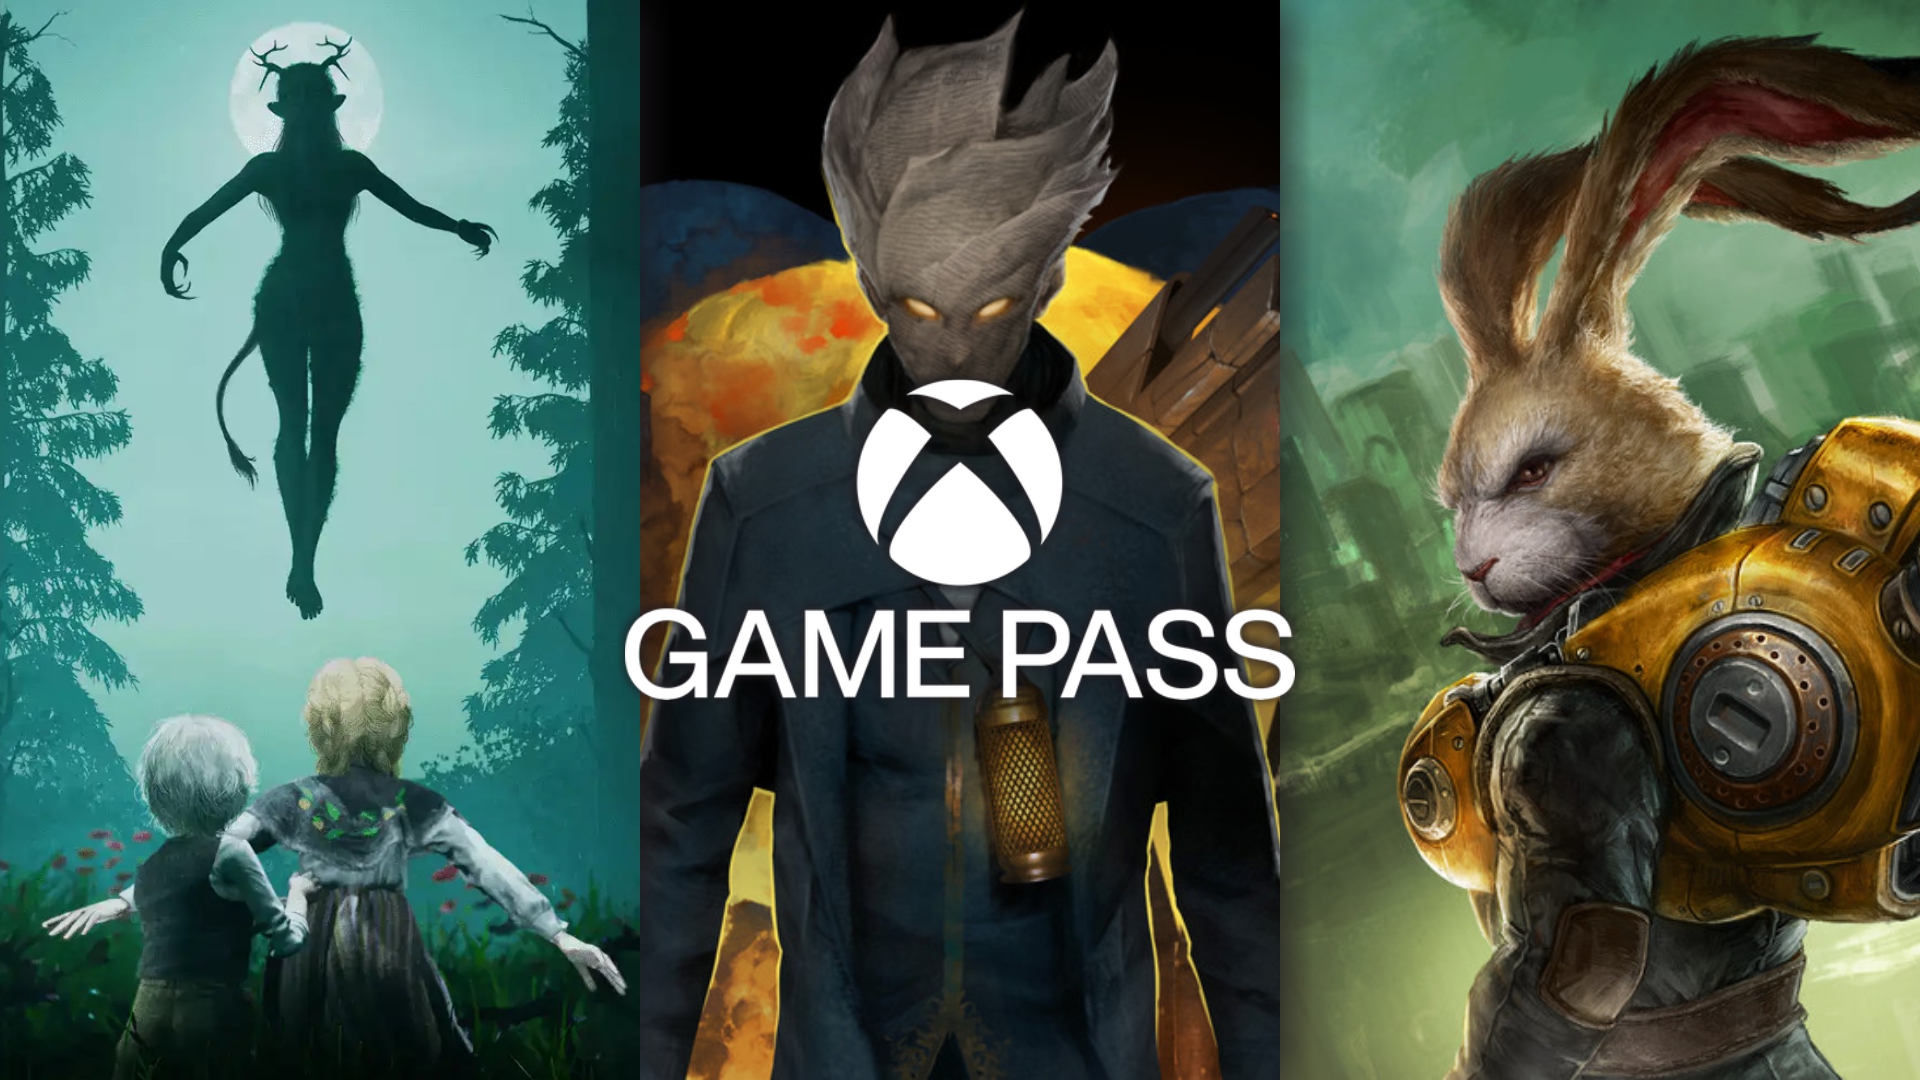 Seven more titles have been announced as arriving soon for Xbox Game Pass PC